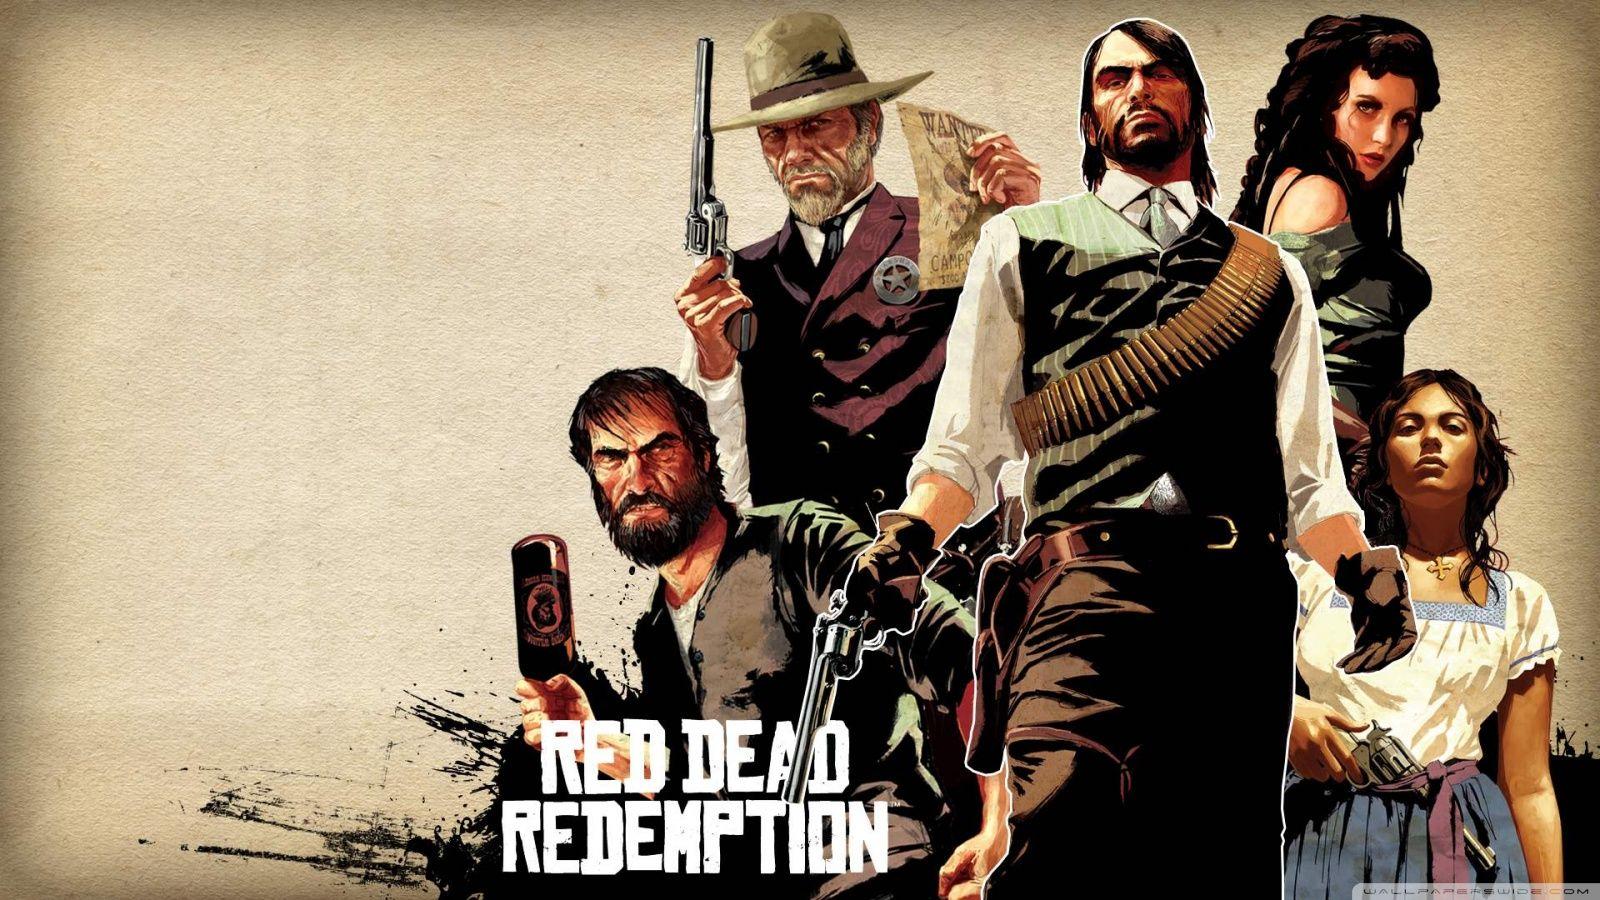 Red Dead Redemption Wallpaper 1600x900 HD Wallpaper, Background Image